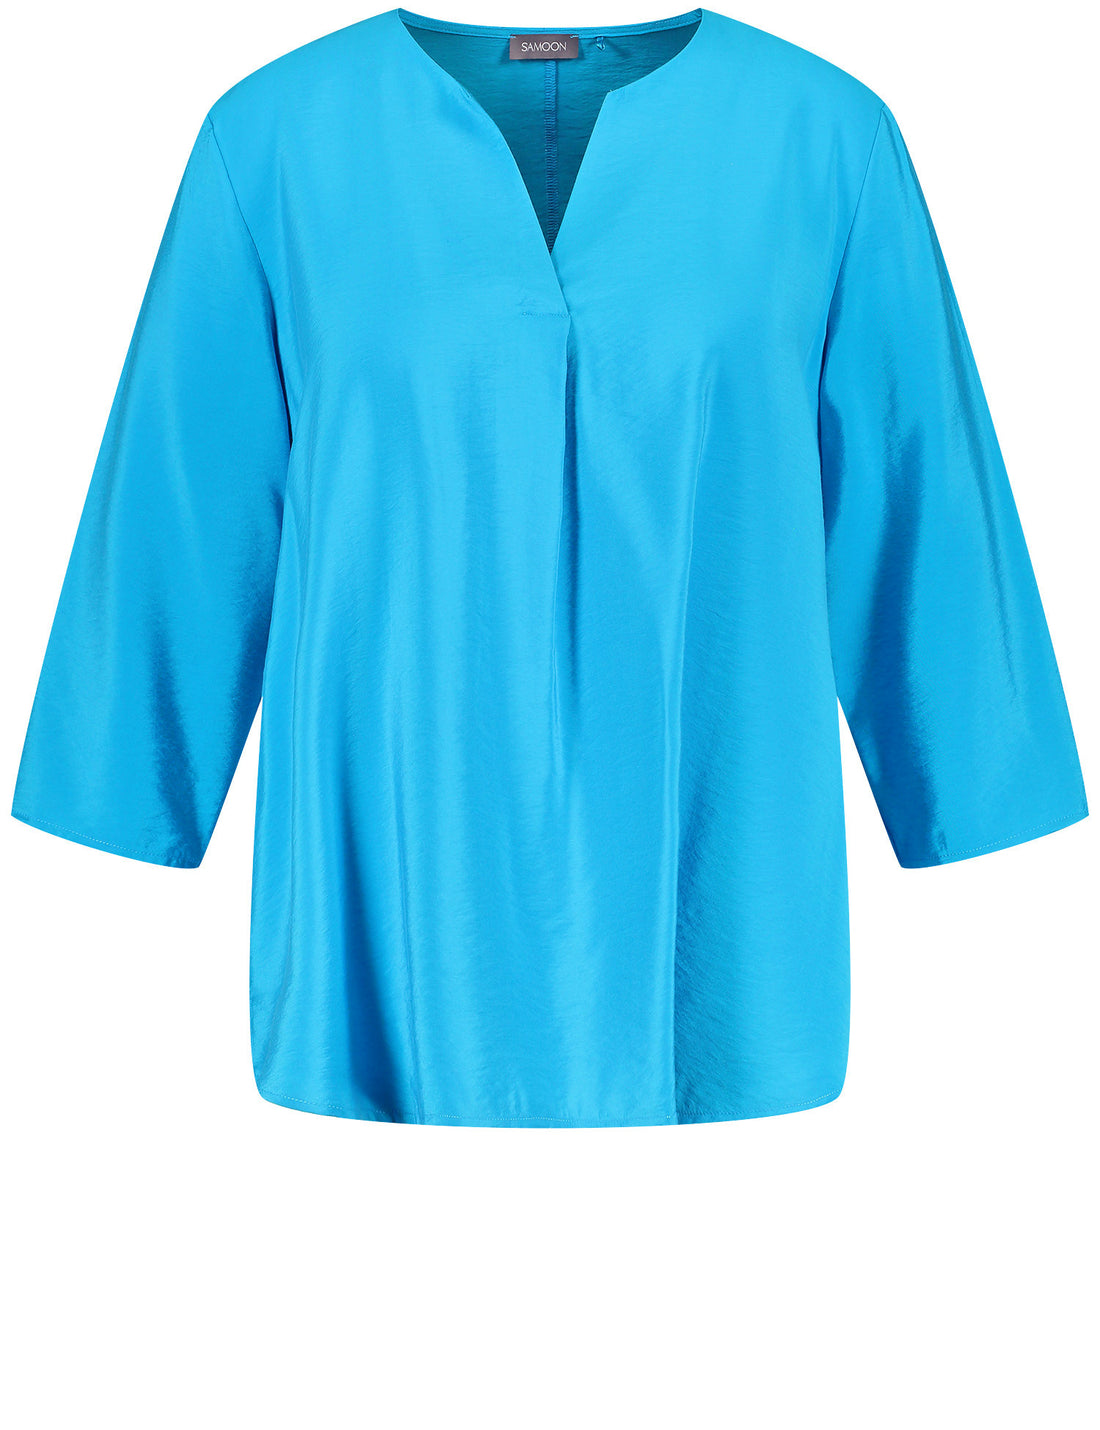 Blue Fine Blouse With 3/4-Length Sleeves_02